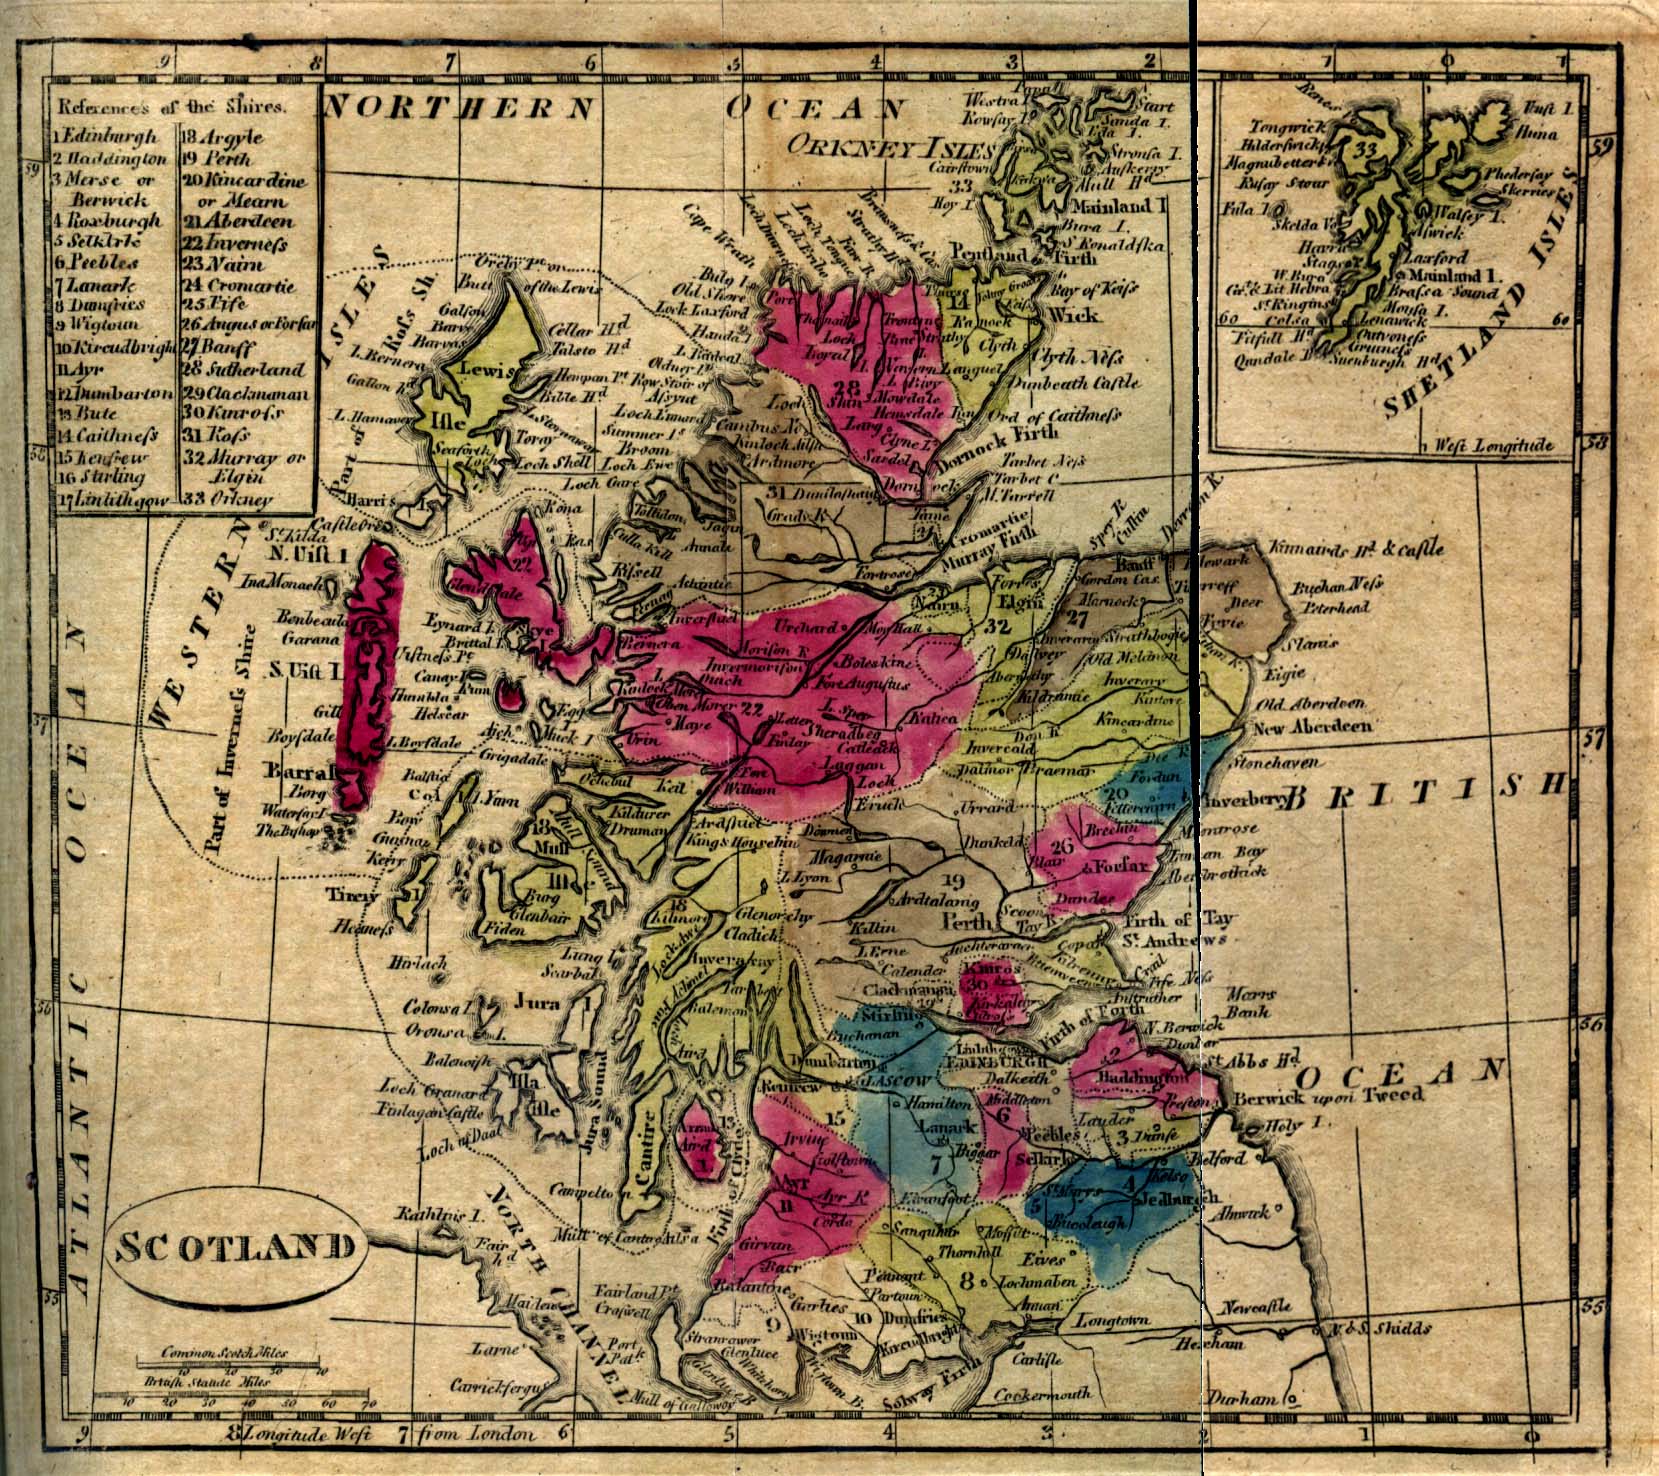 Historical Maps of Europe. Scotland 1808 (582K) From The General Gazetteer; or, Compendious Geographical Dictionary. Compiled by R. Brookes, Revised by W. Guthrie and E. Jones. Eighth Edition, Dublin, 1808